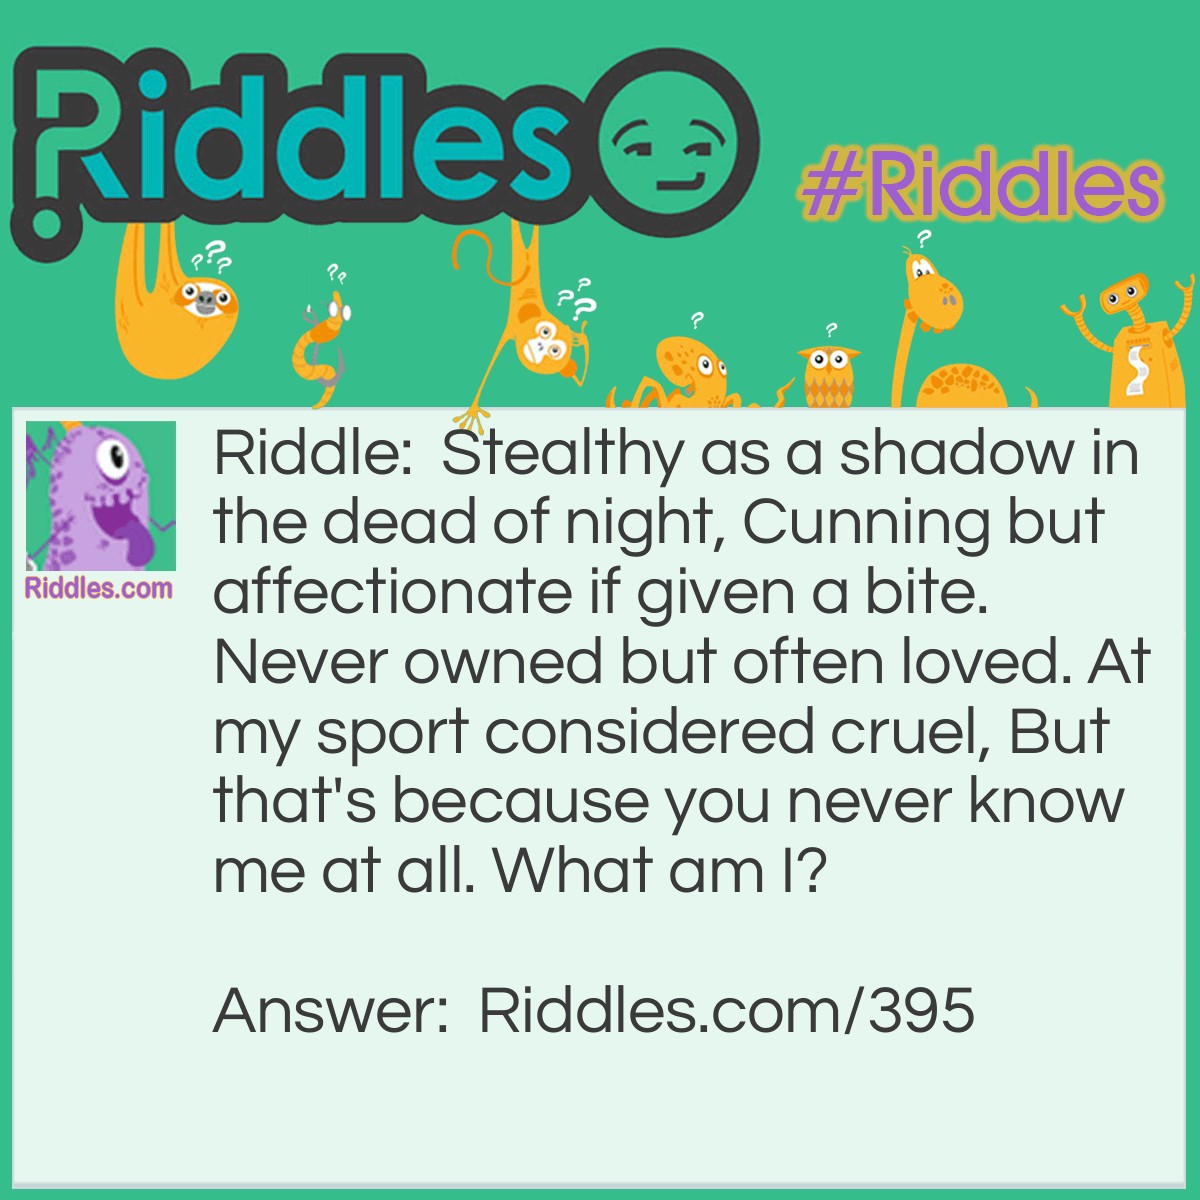 Riddle: Stealthy as a shadow in the dead of night, 
Cunning but affectionate if given a bite. 
Never owned but often loved. 
At my sport considered cruel, 
But that's because you never know me at all. 

What am I?  Answer: A cat.